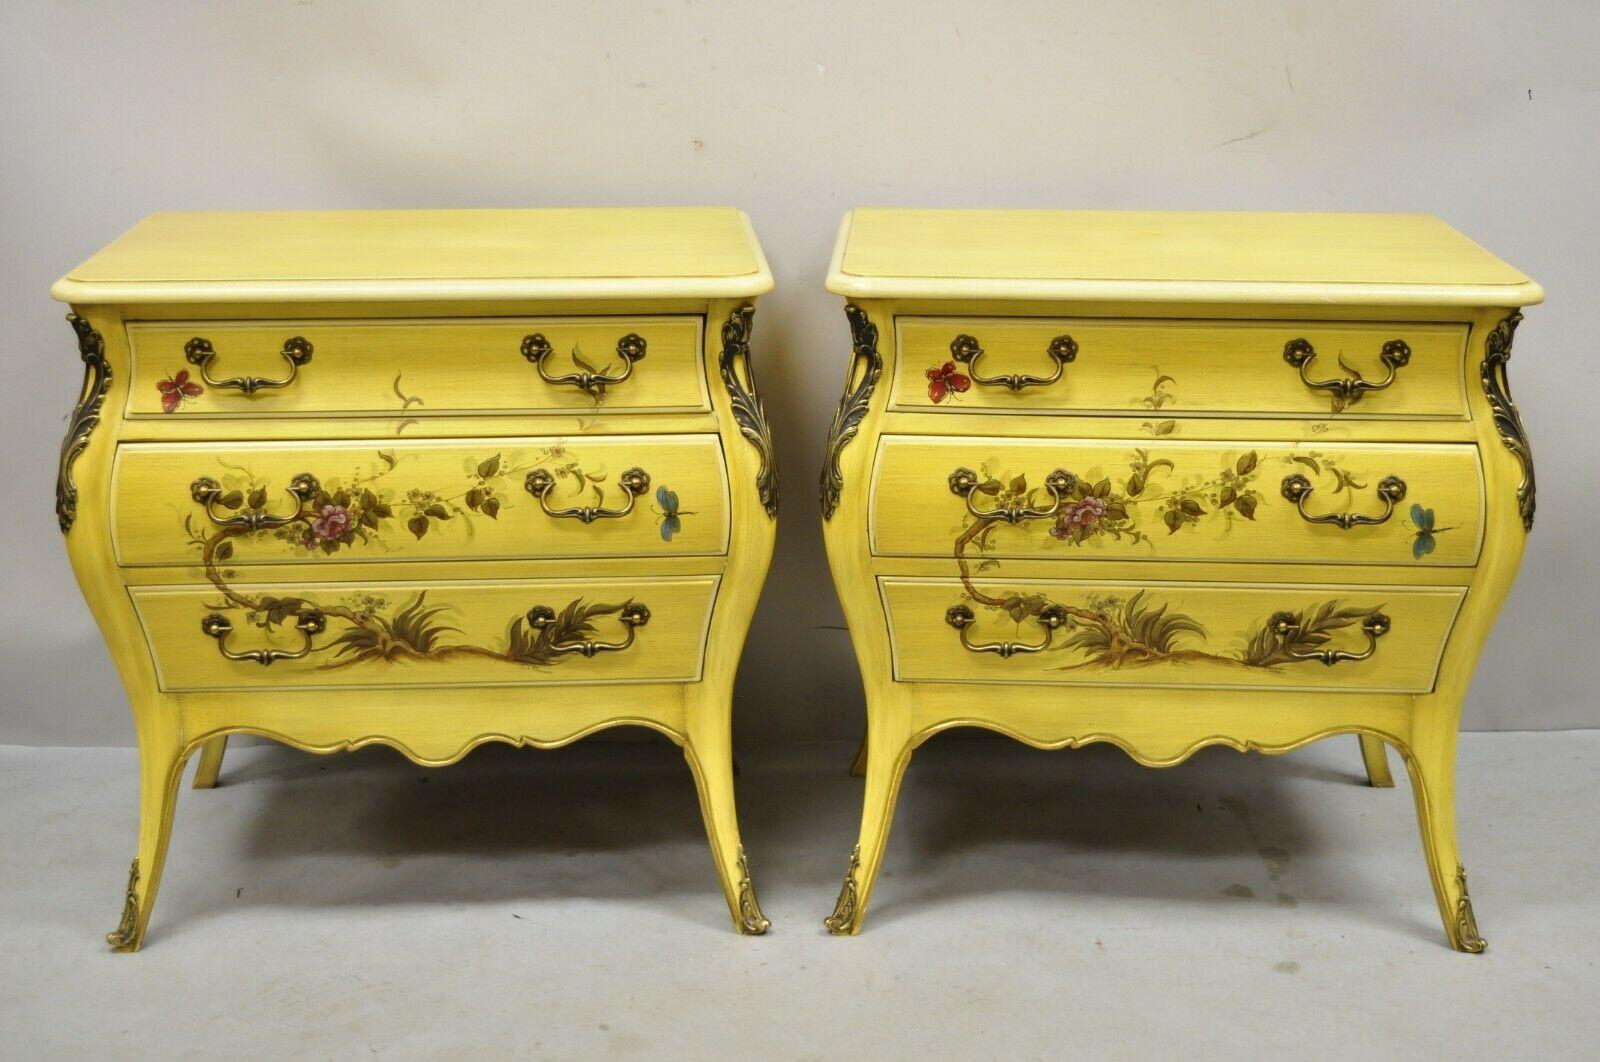 French Louis XV Style Yellow Butterfly Painted 3 Drawer Bombe Nightstands - a Pair. Item features yellow painted finish, hand painted butterfly and floral vine scenes to the front and sides, brass ormolu, shapely bombe form, 3 drawers, solid brass